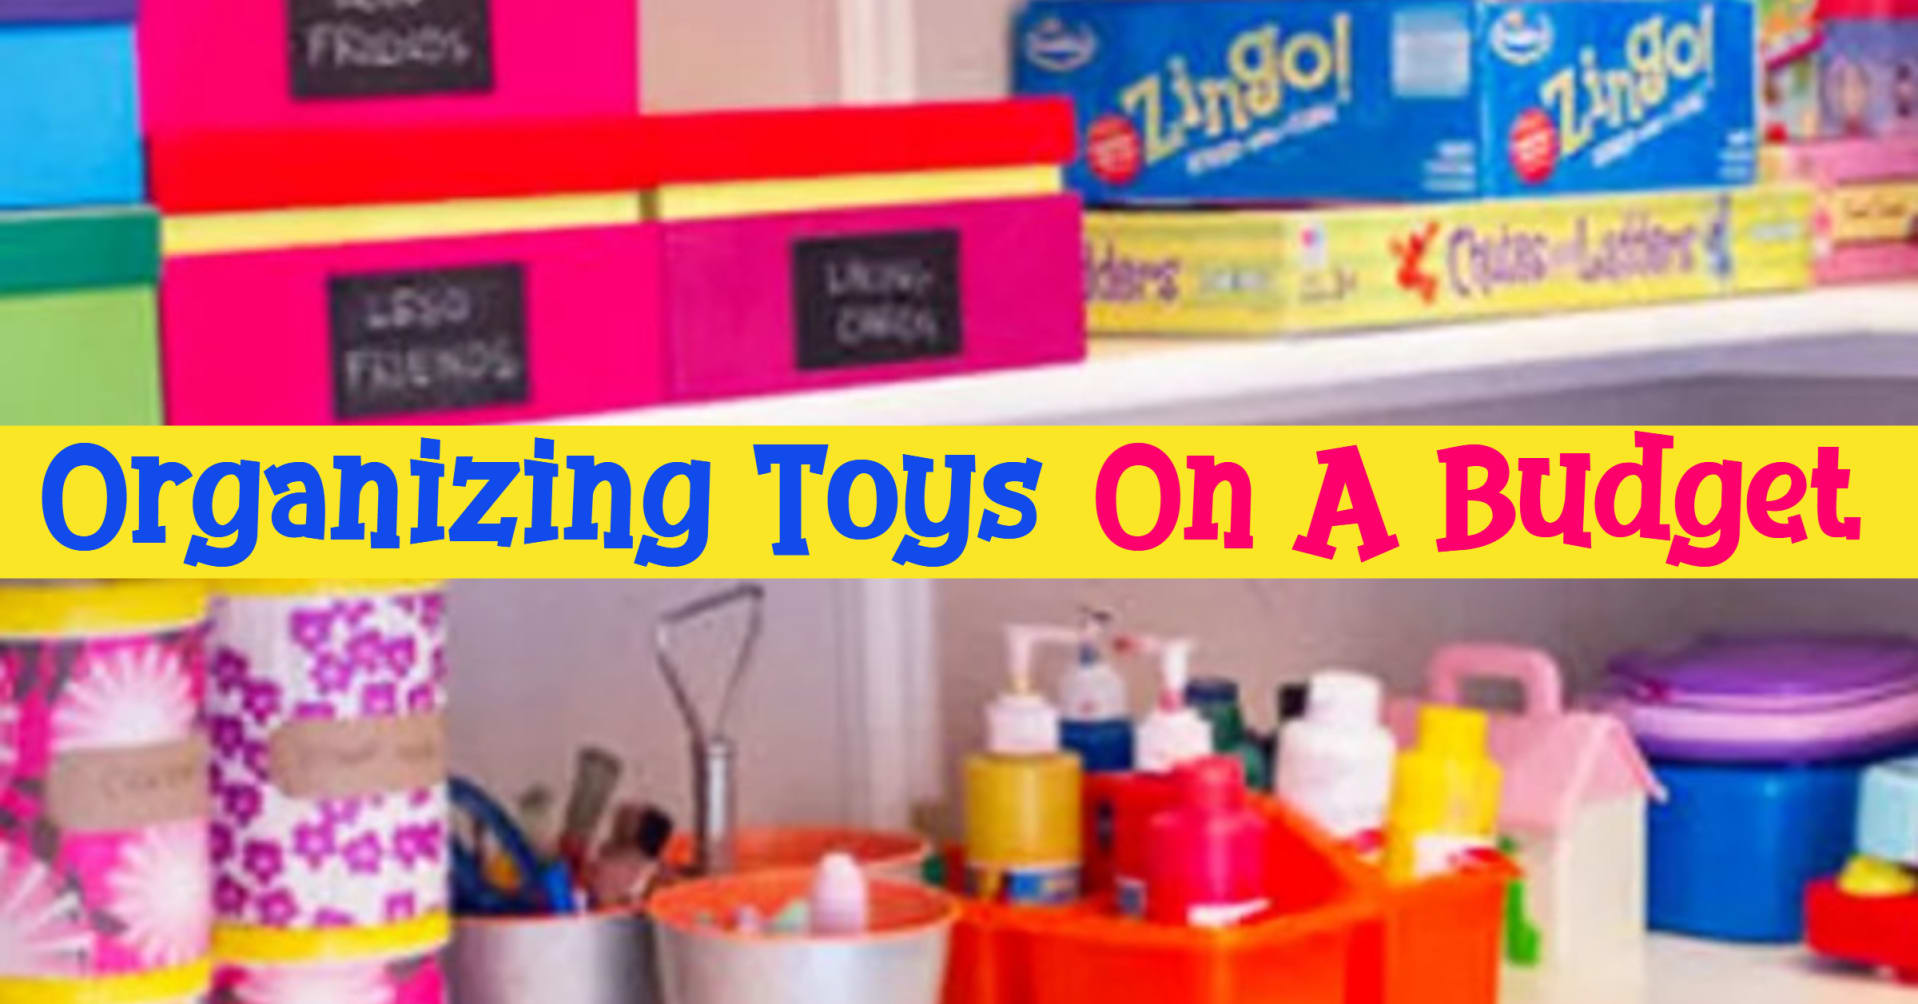 Organizing Toys - let's declutter and organize toys in the playroom, living room, bedroom, in your kids toy closet or their room even if you're on a budget with these cheap DIY Dollar Store toy storage ideas for small spaces. Organizing toys in kids rooms and other toys storage solutions for small spaces - organize kids toys, games, books, stuffed animals, action figures, hot wheels and legos with these home organization ideas and tips - this is how to organize toys and declutter toy clutter